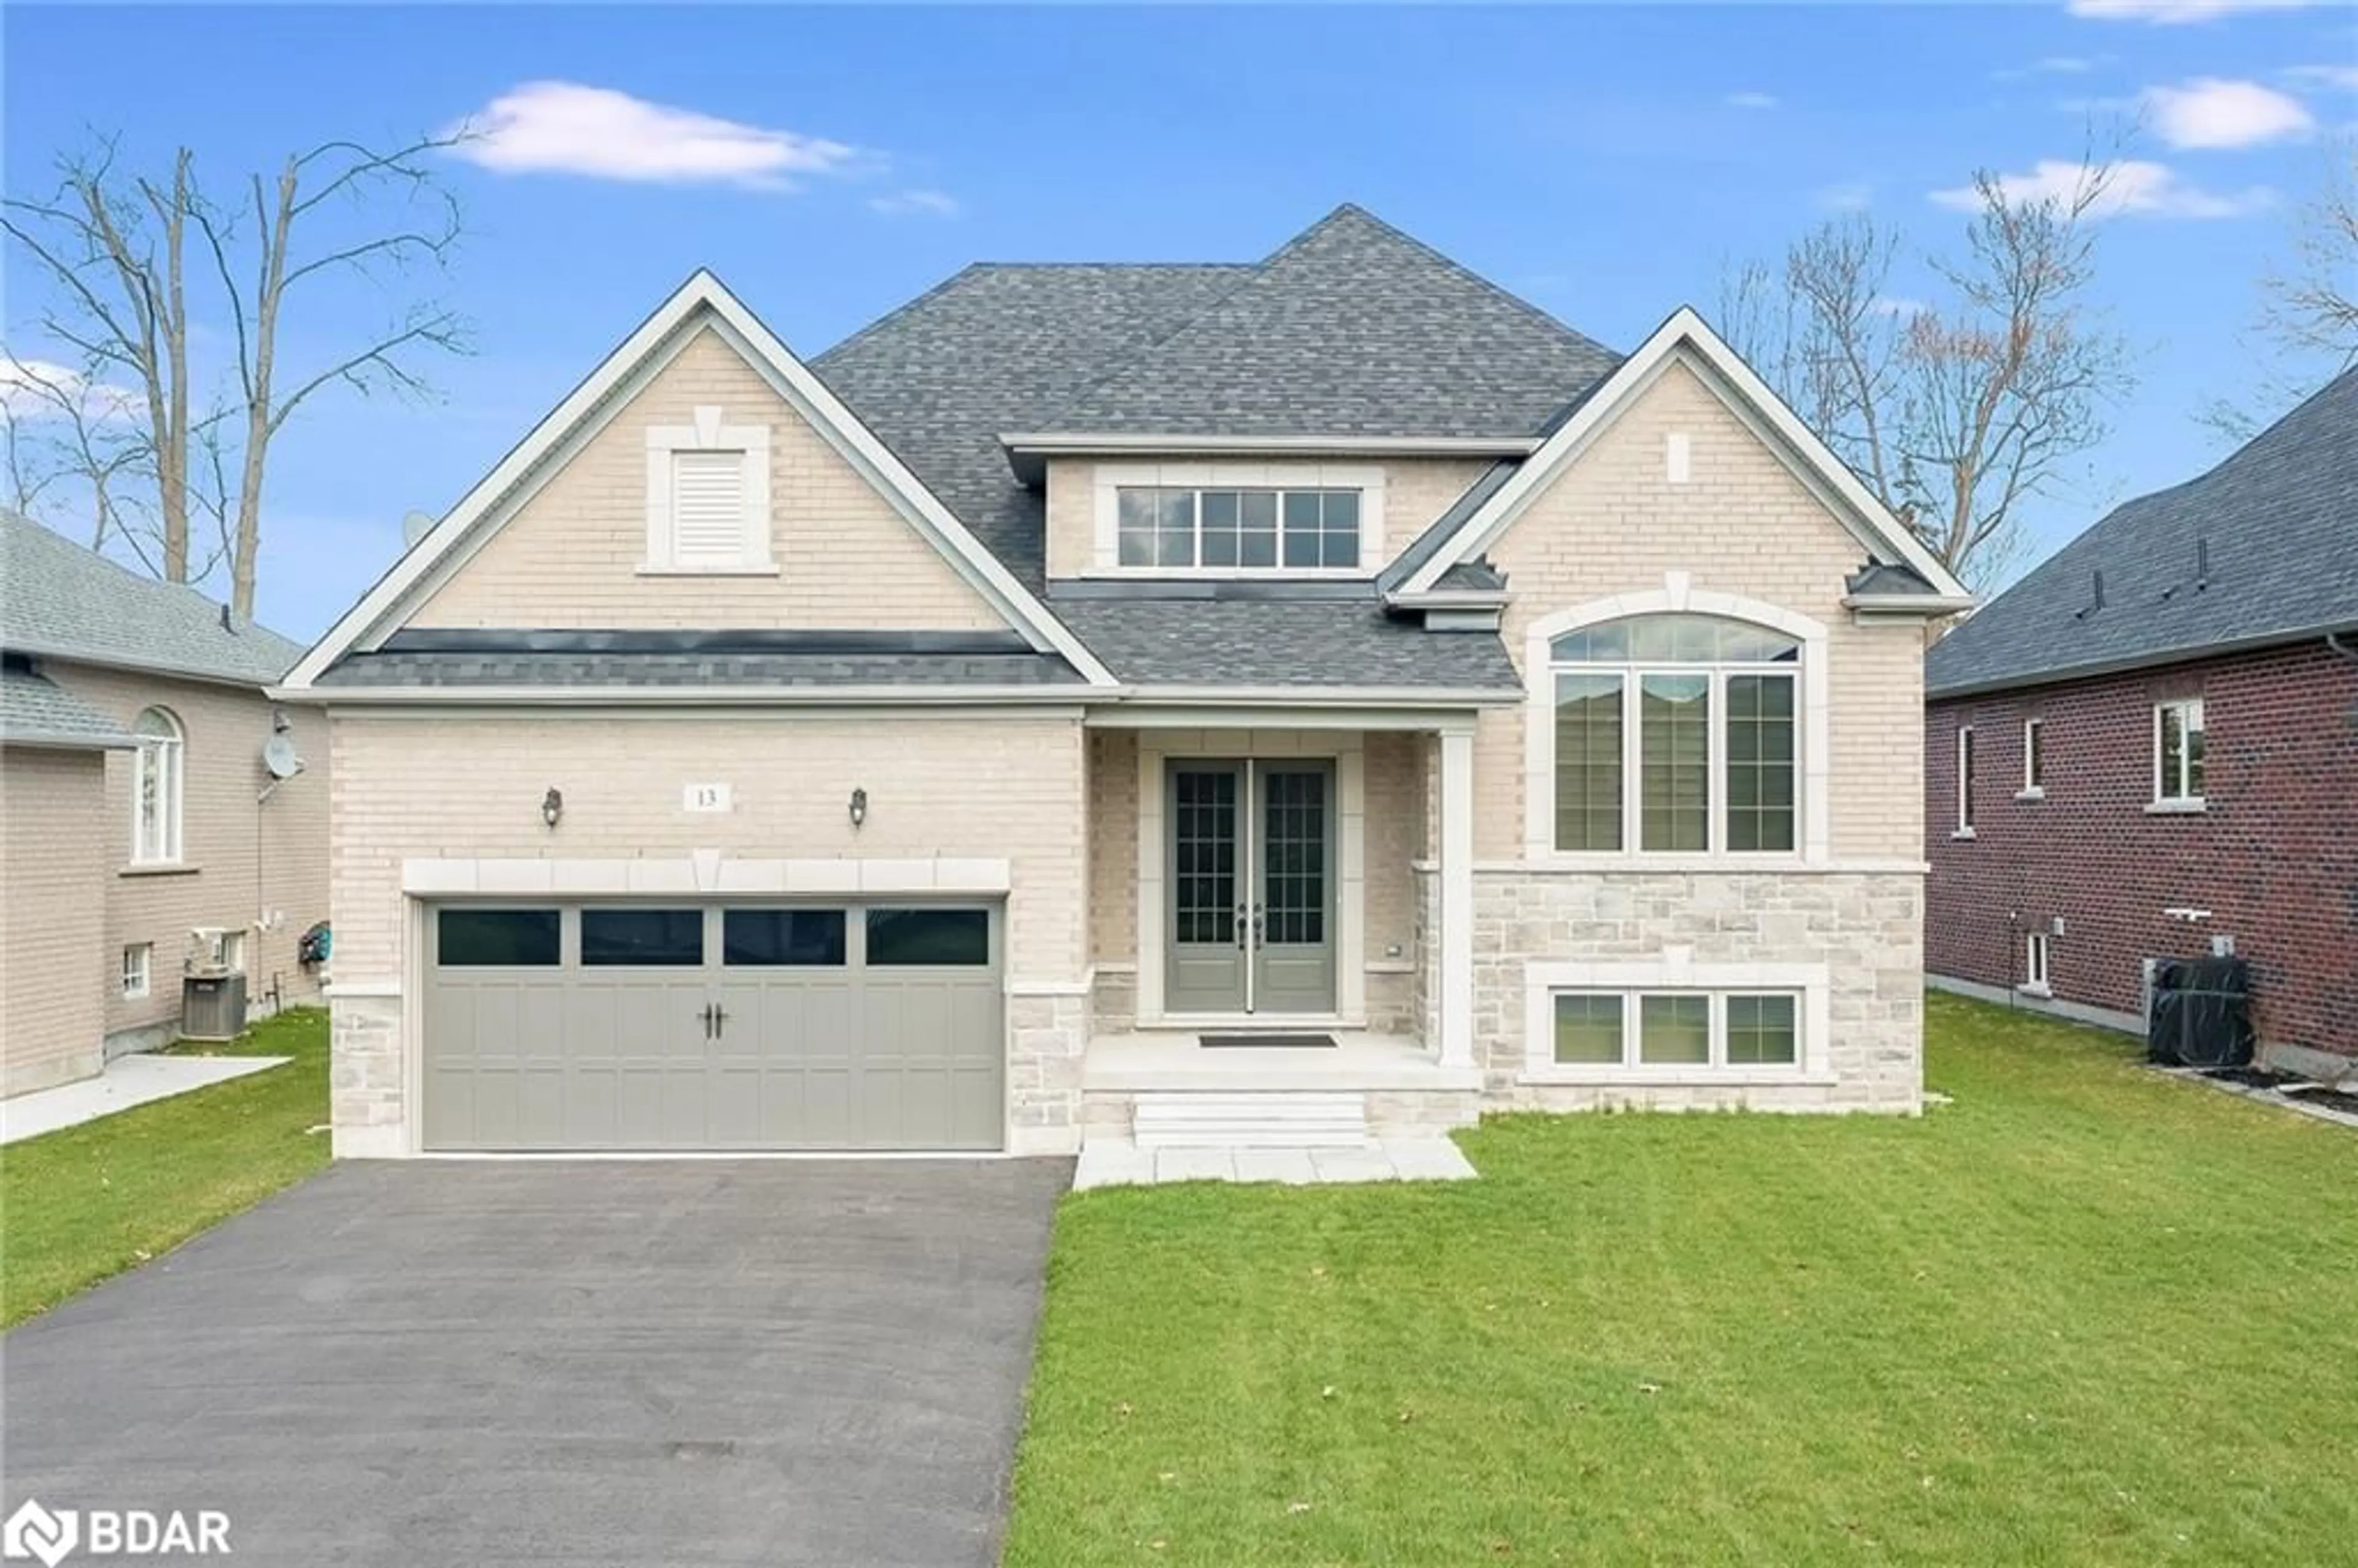 Home with brick exterior material for 13 Fawndale Cres, Wasaga Beach Ontario L9Z 2B3